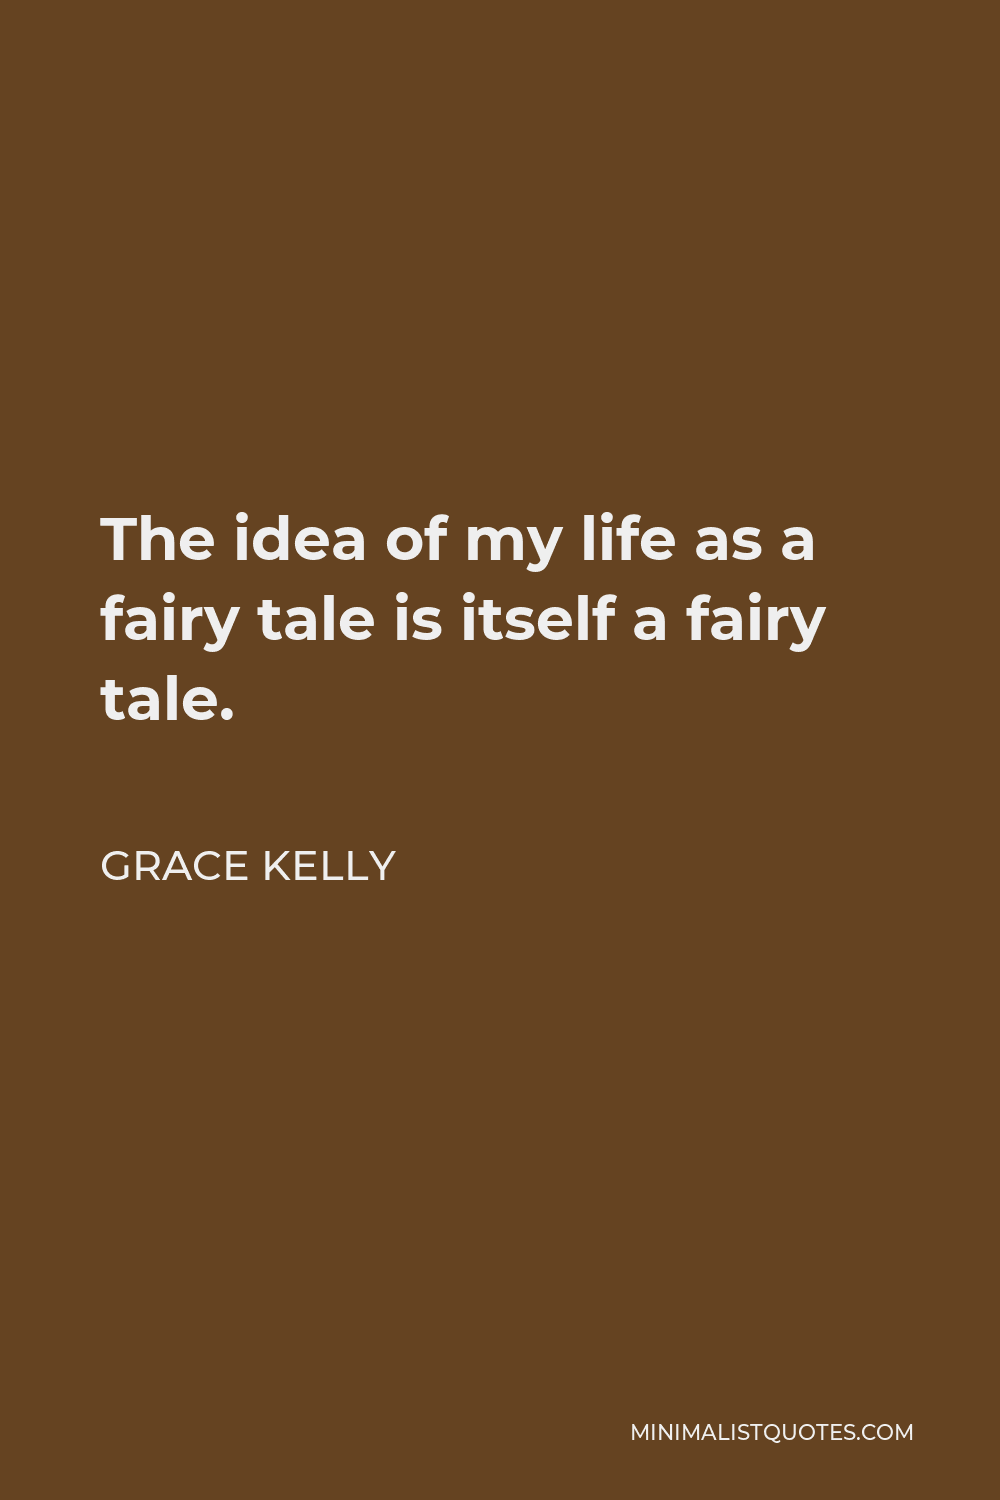 Grace Kelly Quote - The idea of my life as a fairy tale is itself a fairy tale.